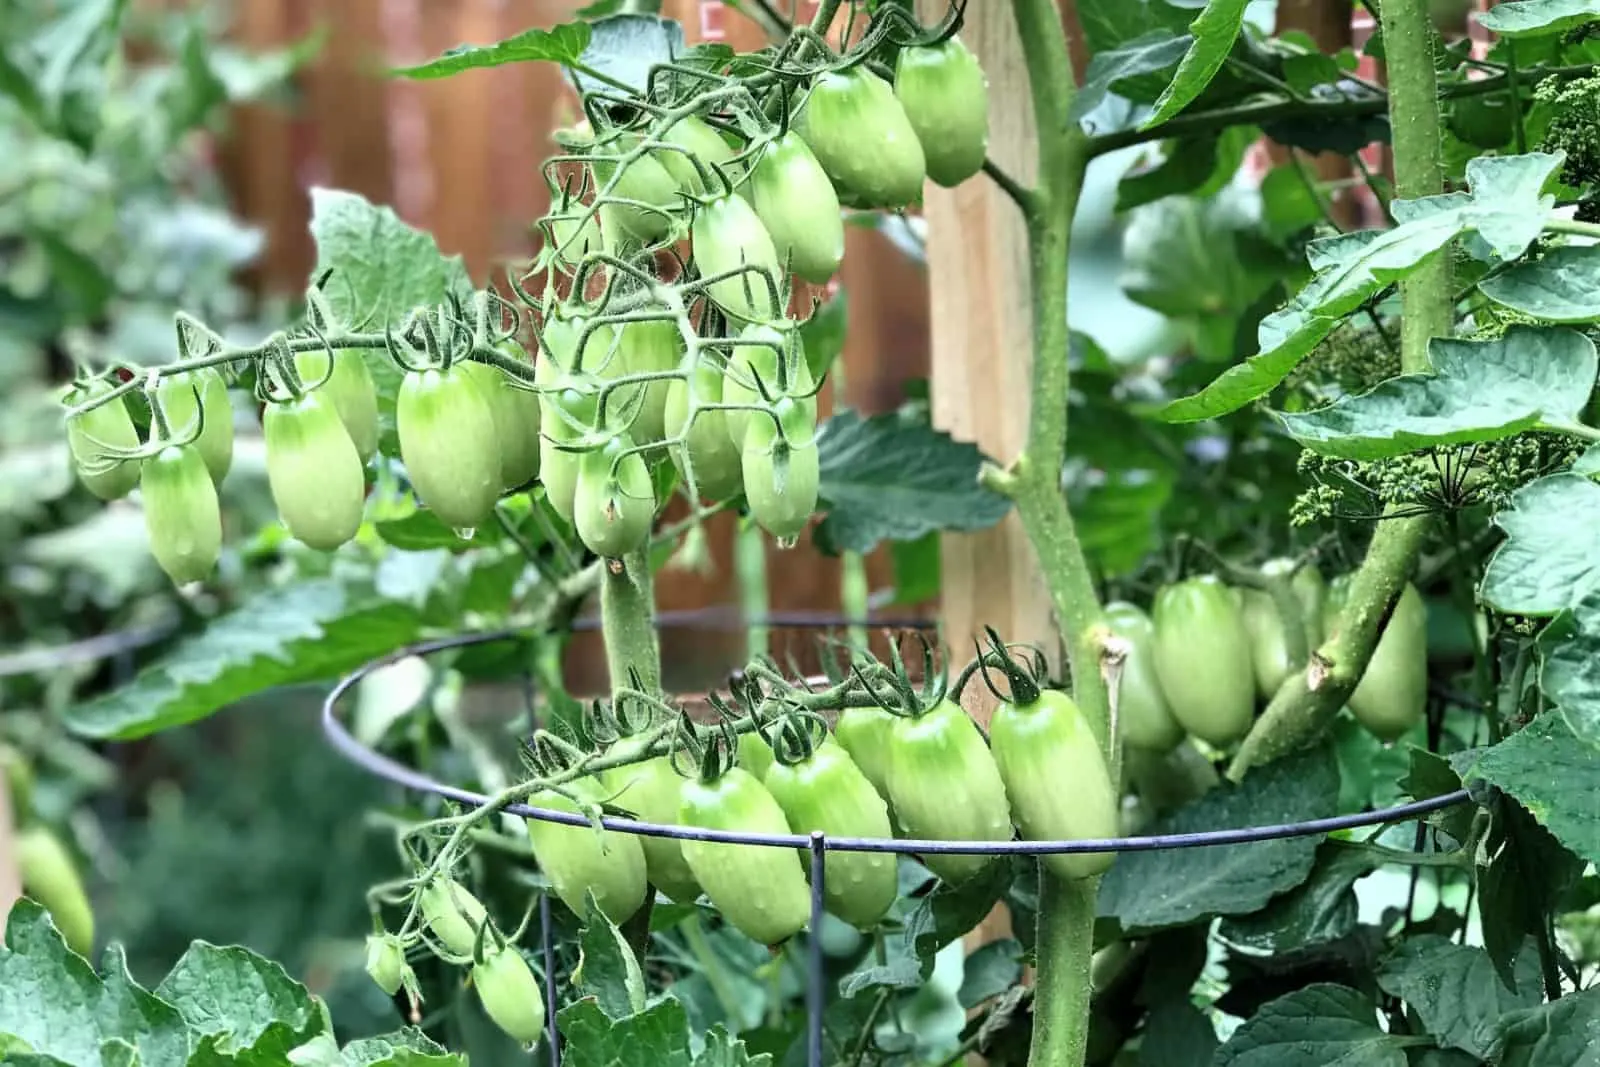 Green, oblong-shaped tomato clusters hanging supported by tomato cage.